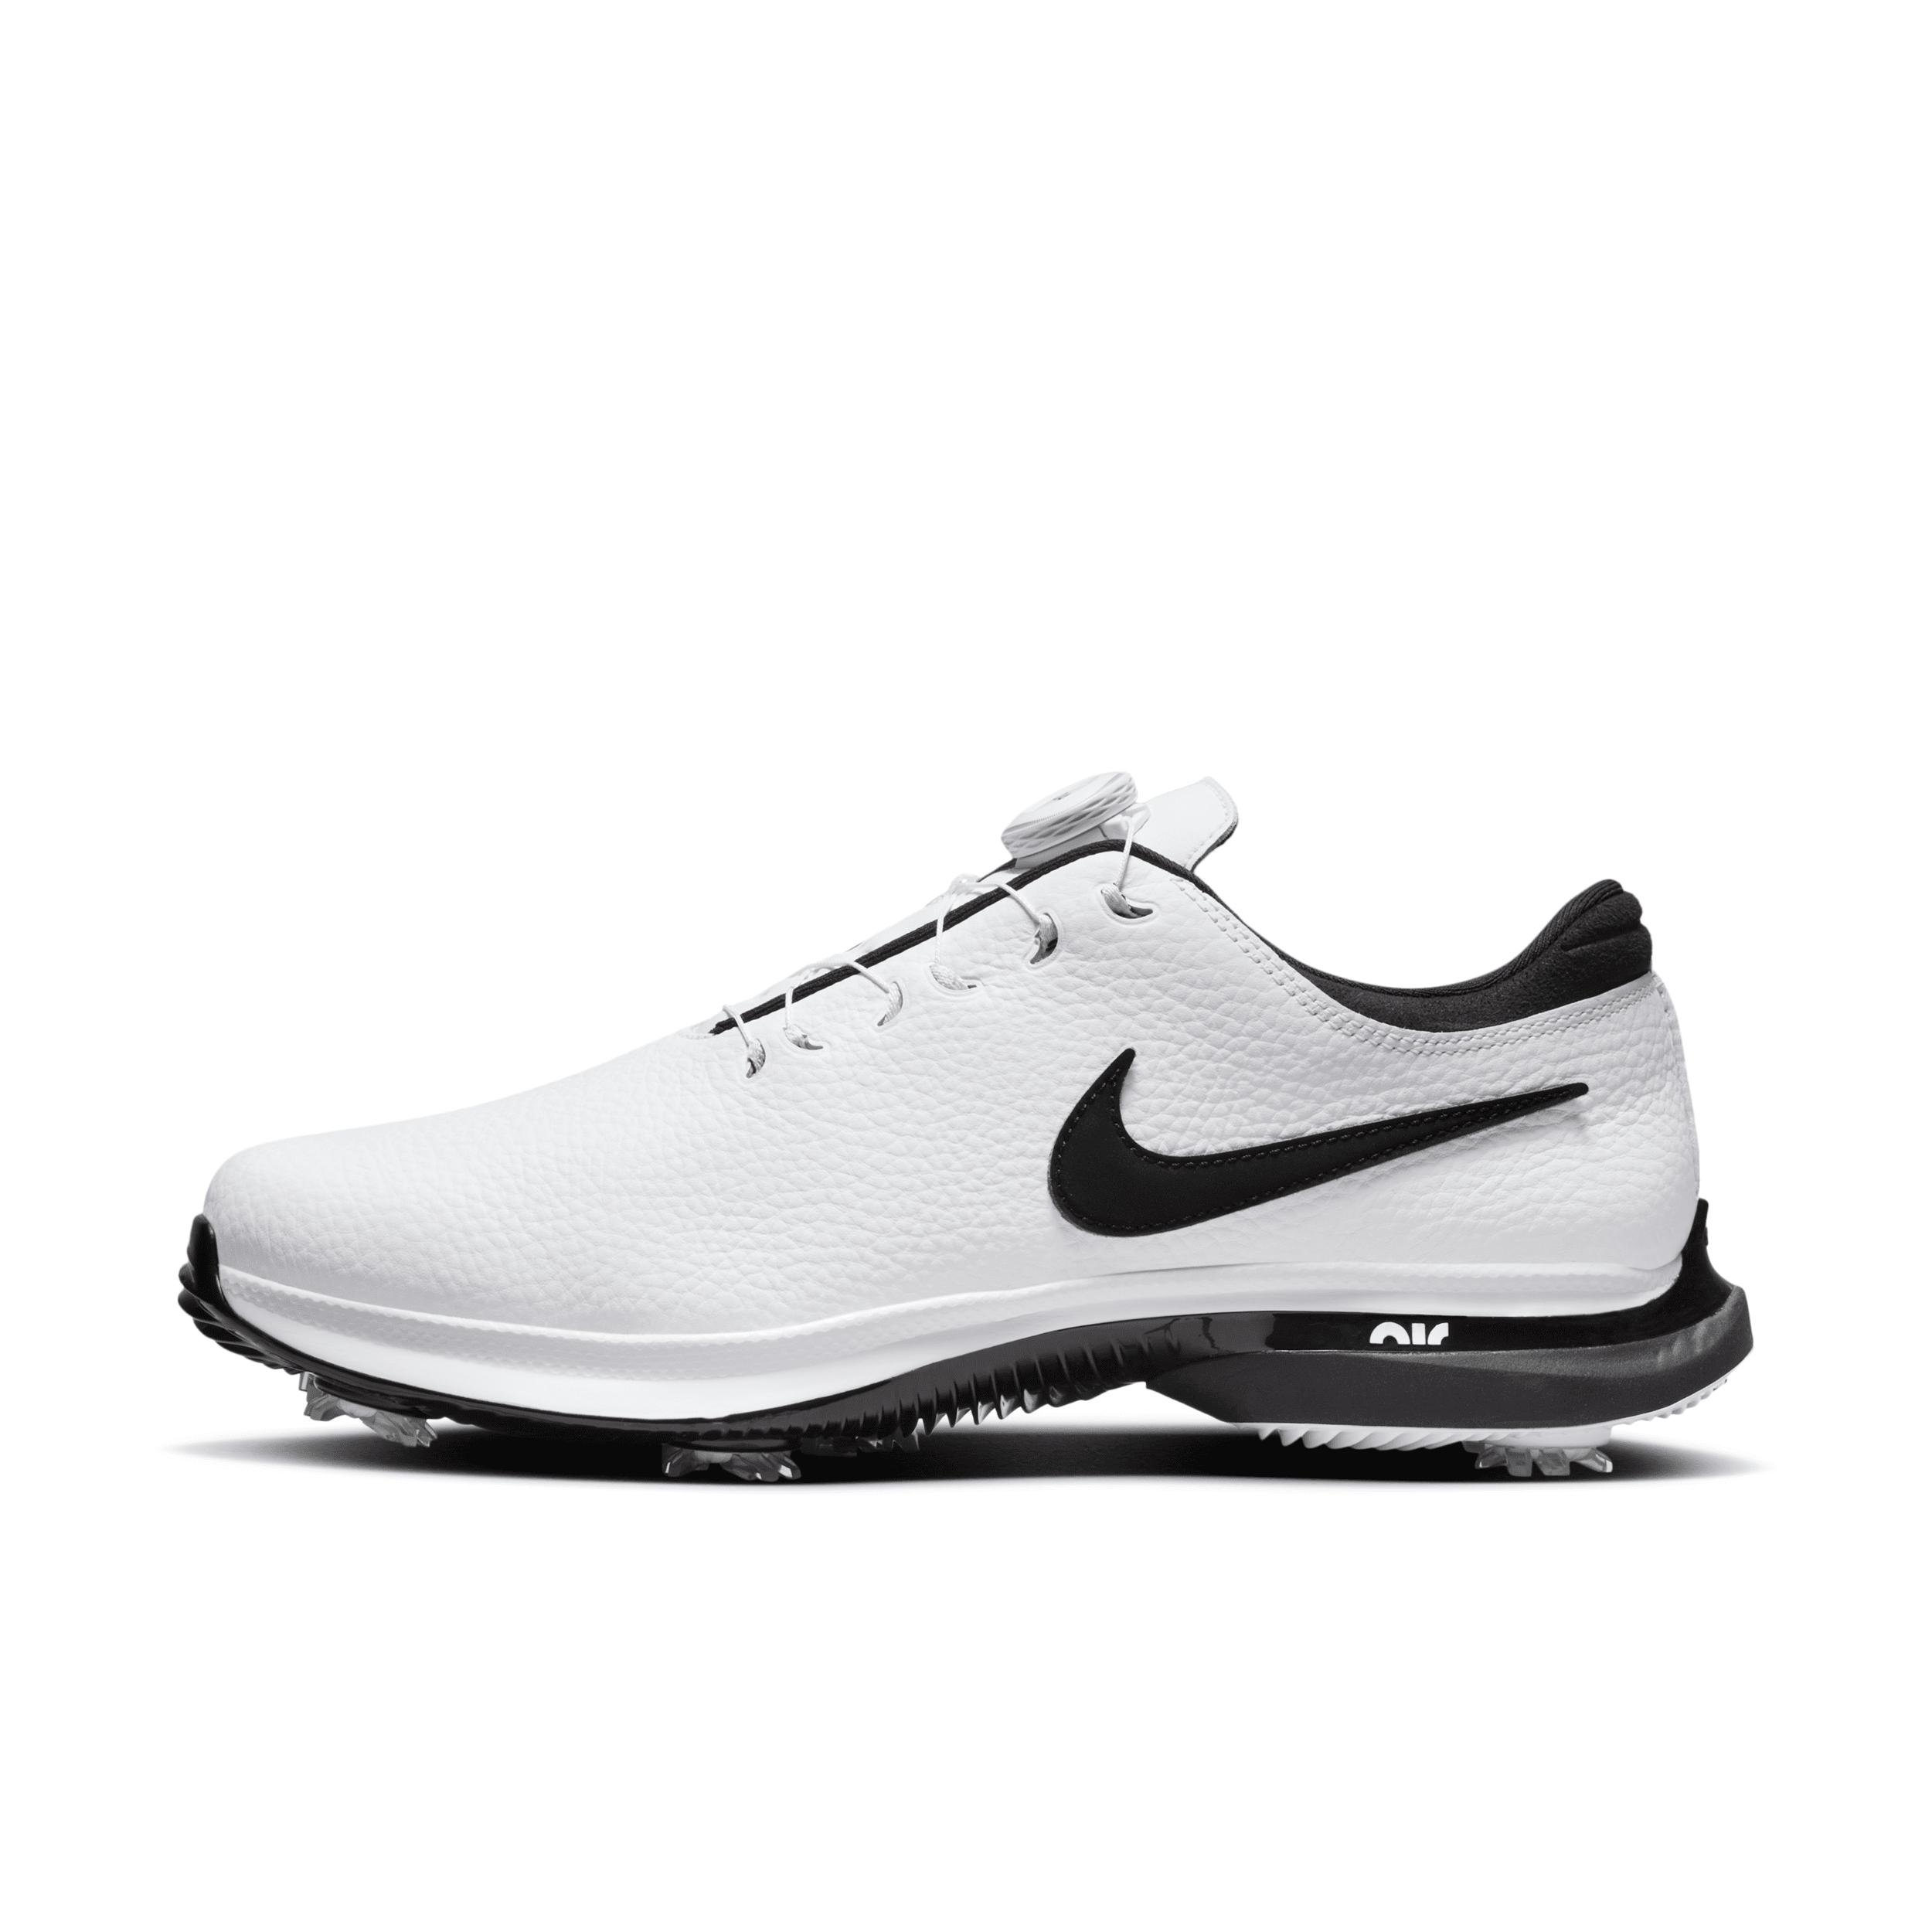 Nike Men's Air Zoom Victory Tour 3 Boa Golf Shoes by NIKE